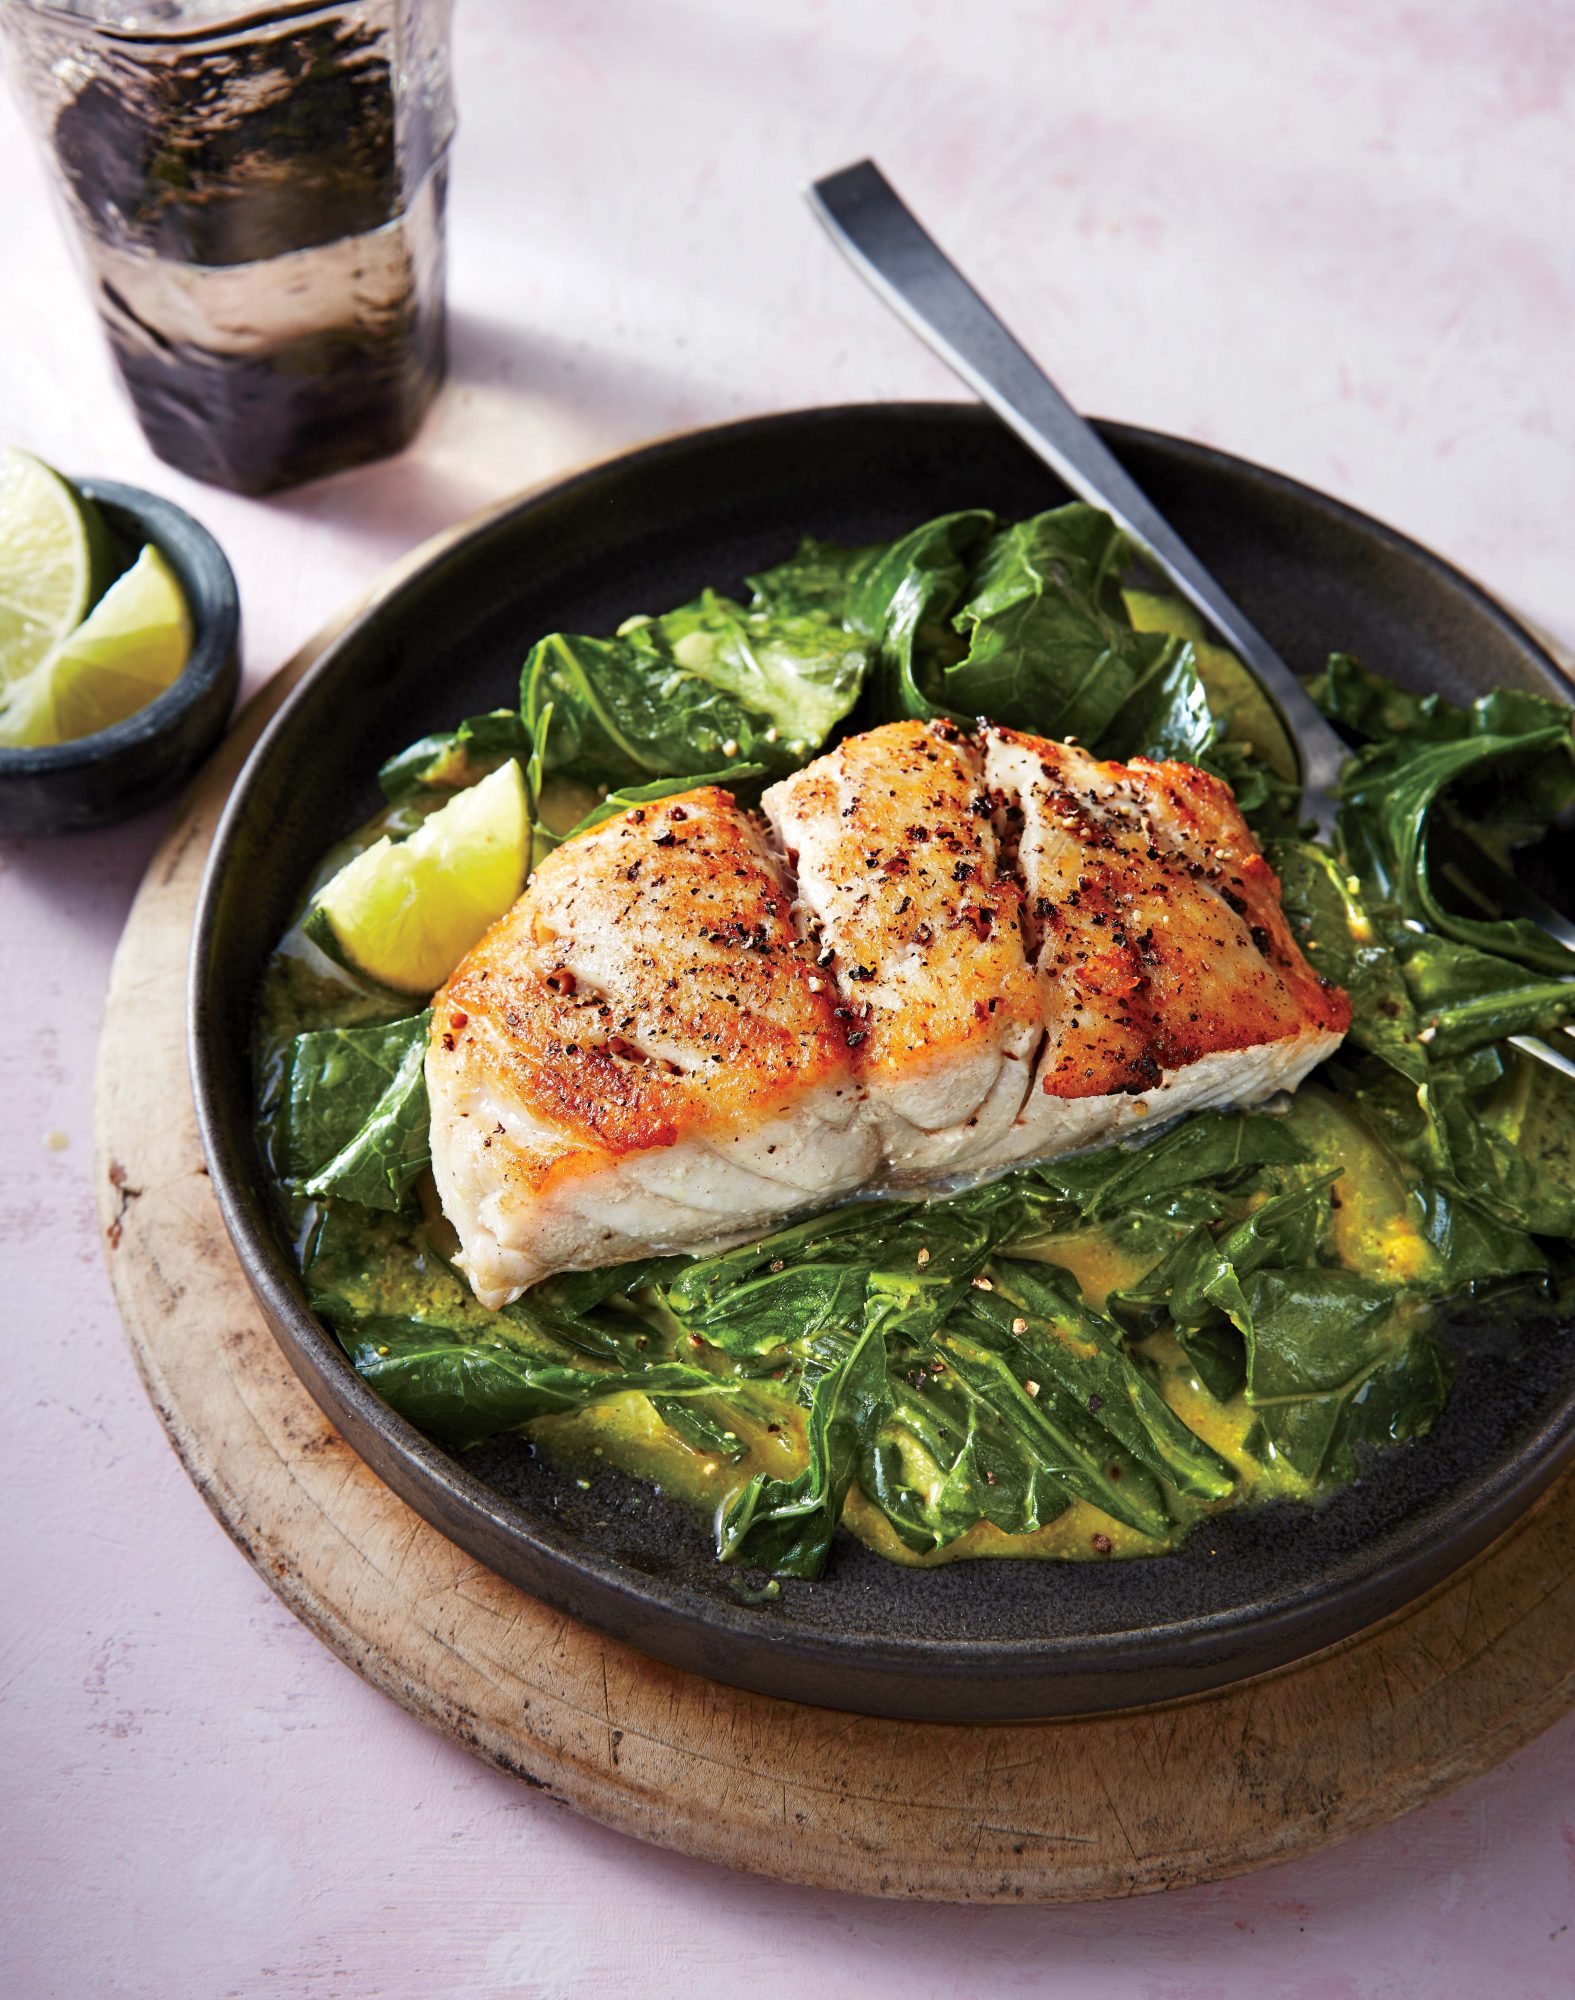 Sautéed Snapper with Curried Greens